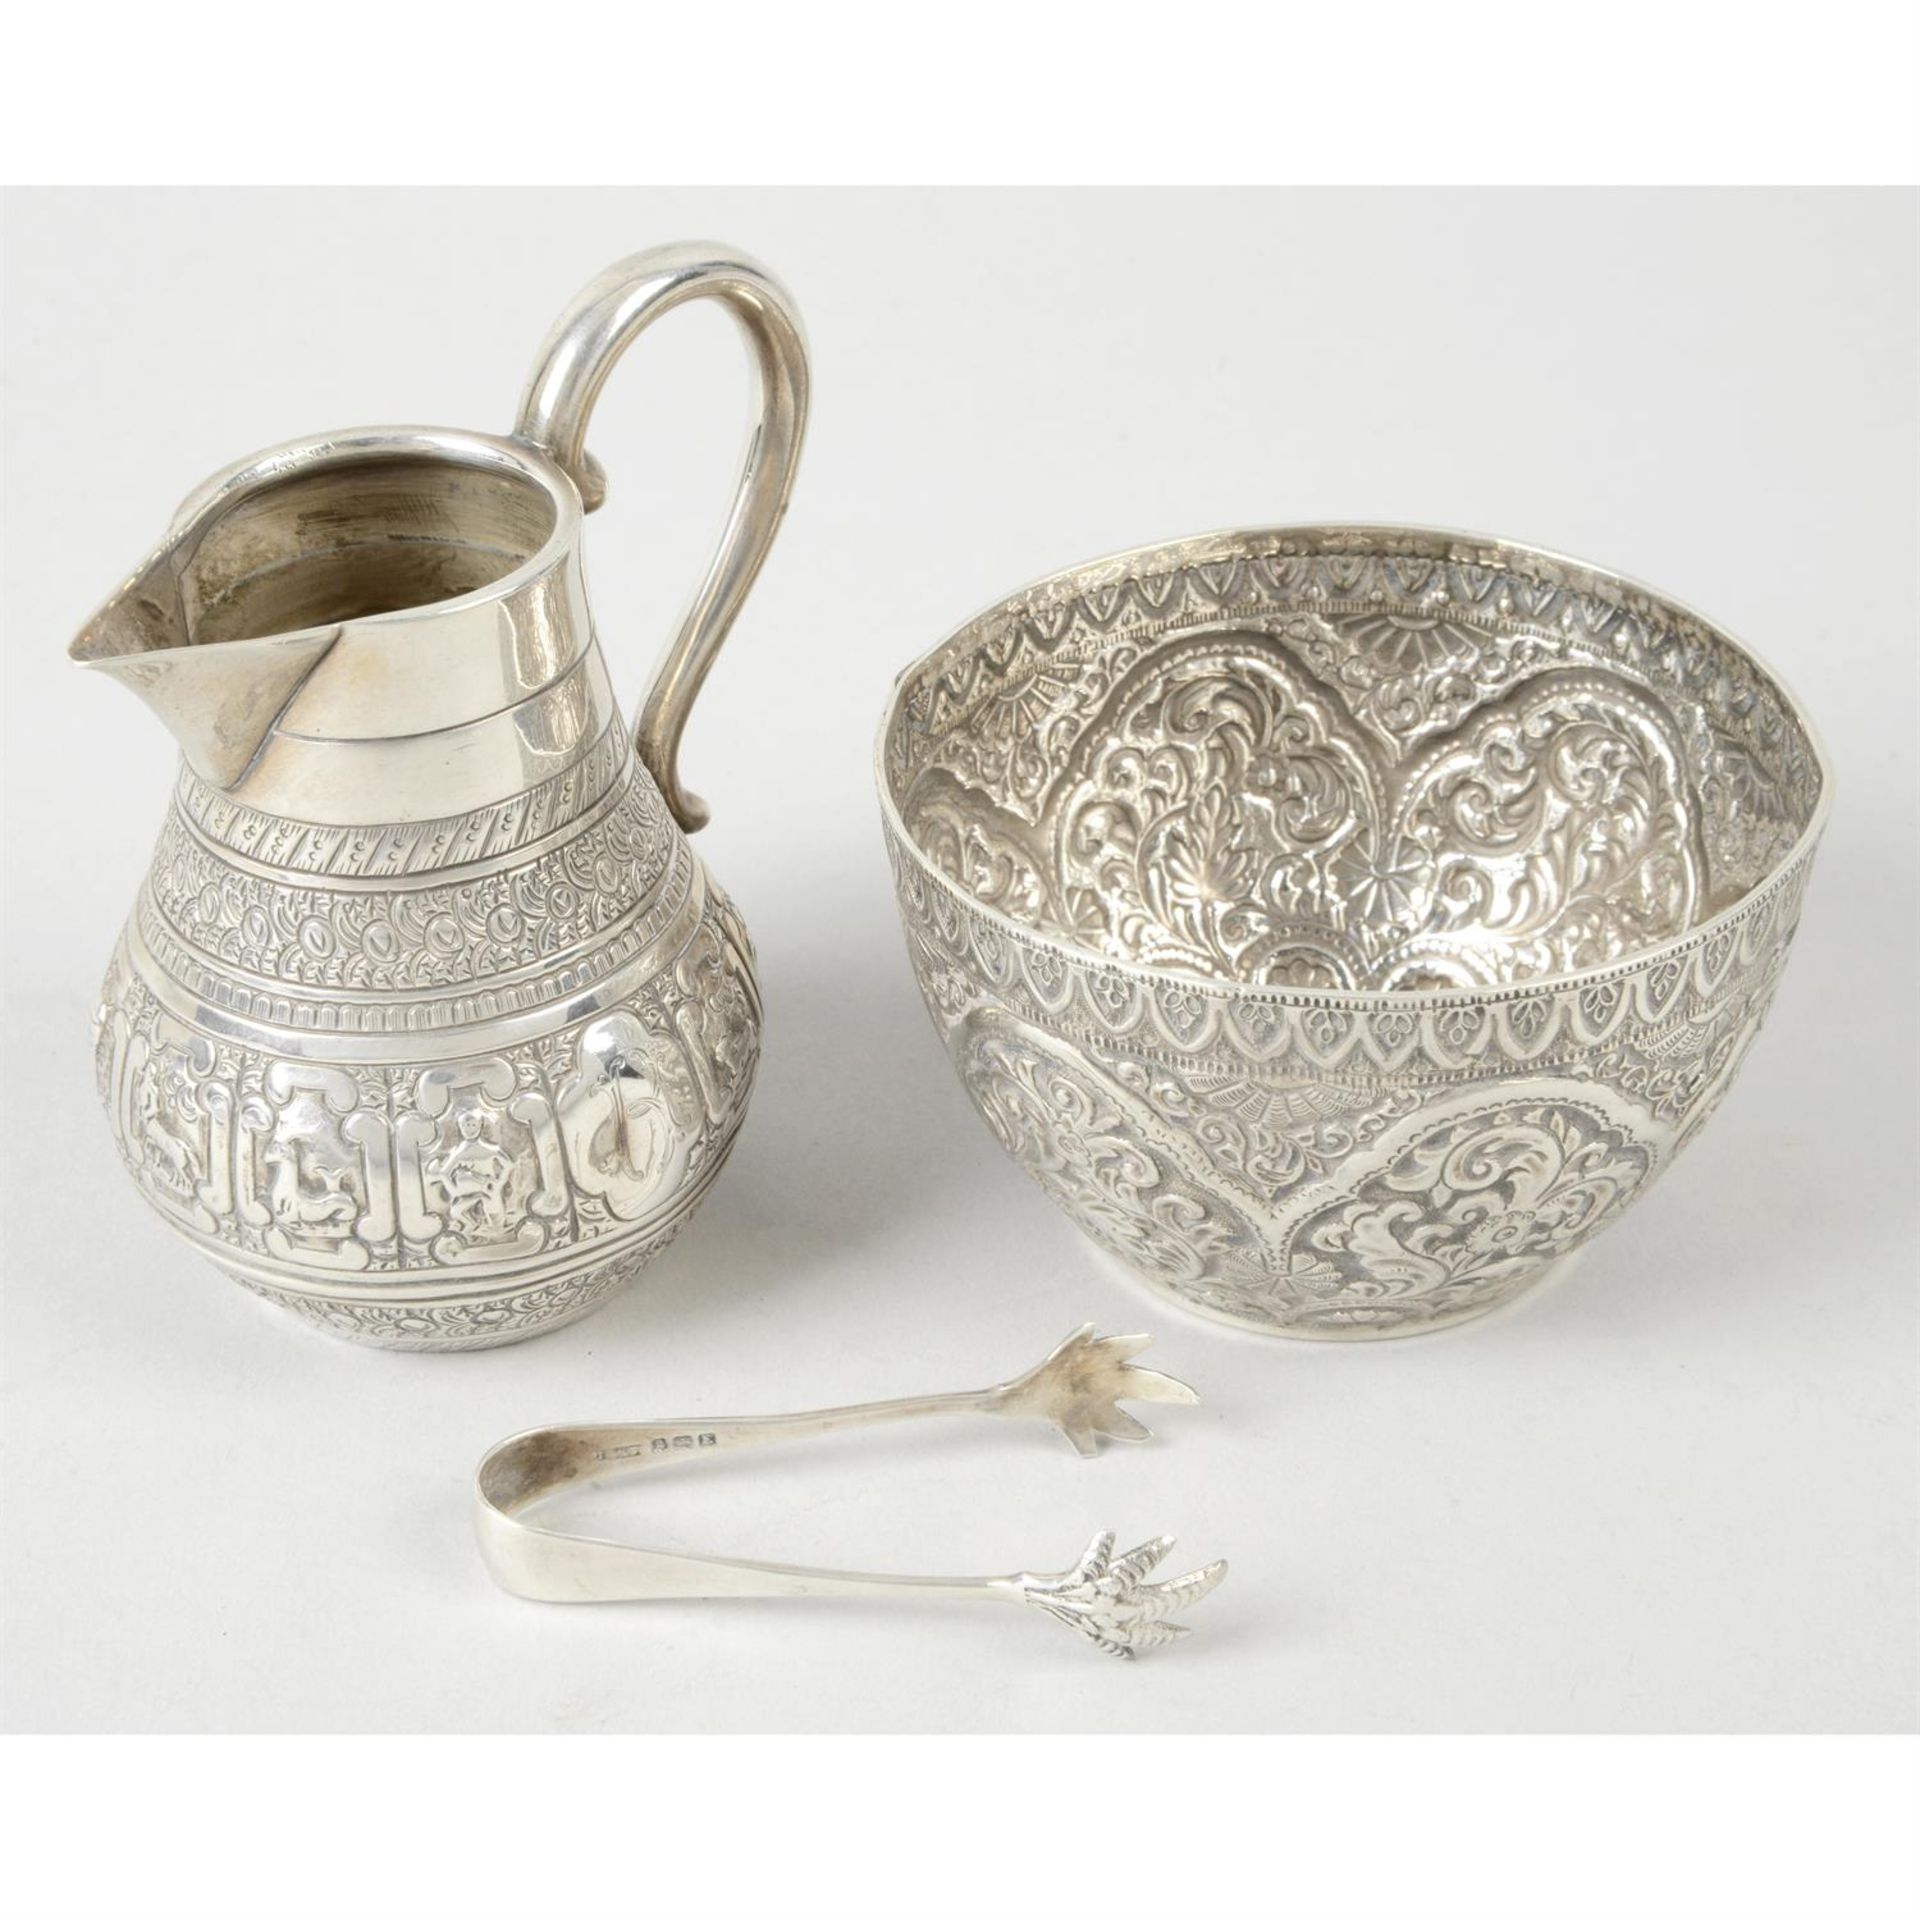 A mid-Victorian silver cream jug, plus a sugar bowl with a later pair of tongs & a plated mustard